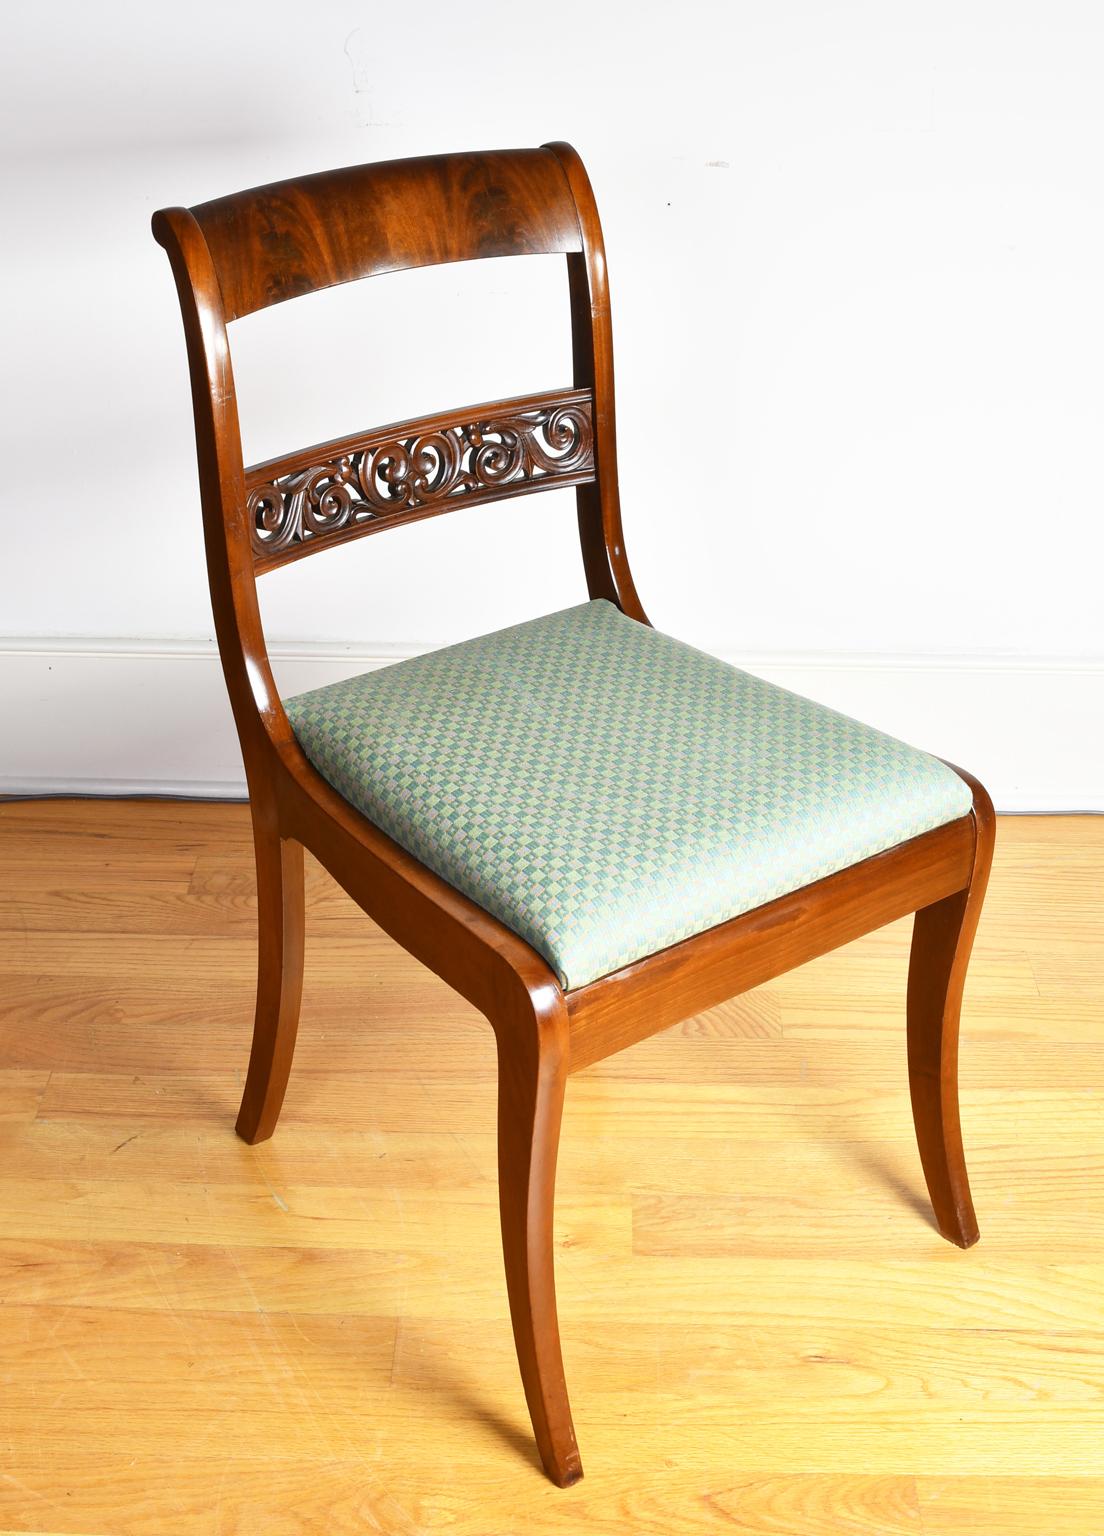 Set of 11 Antique Dining Chairs with 9 Sides & 2 Arms in West Indies Mahogany For Sale 10